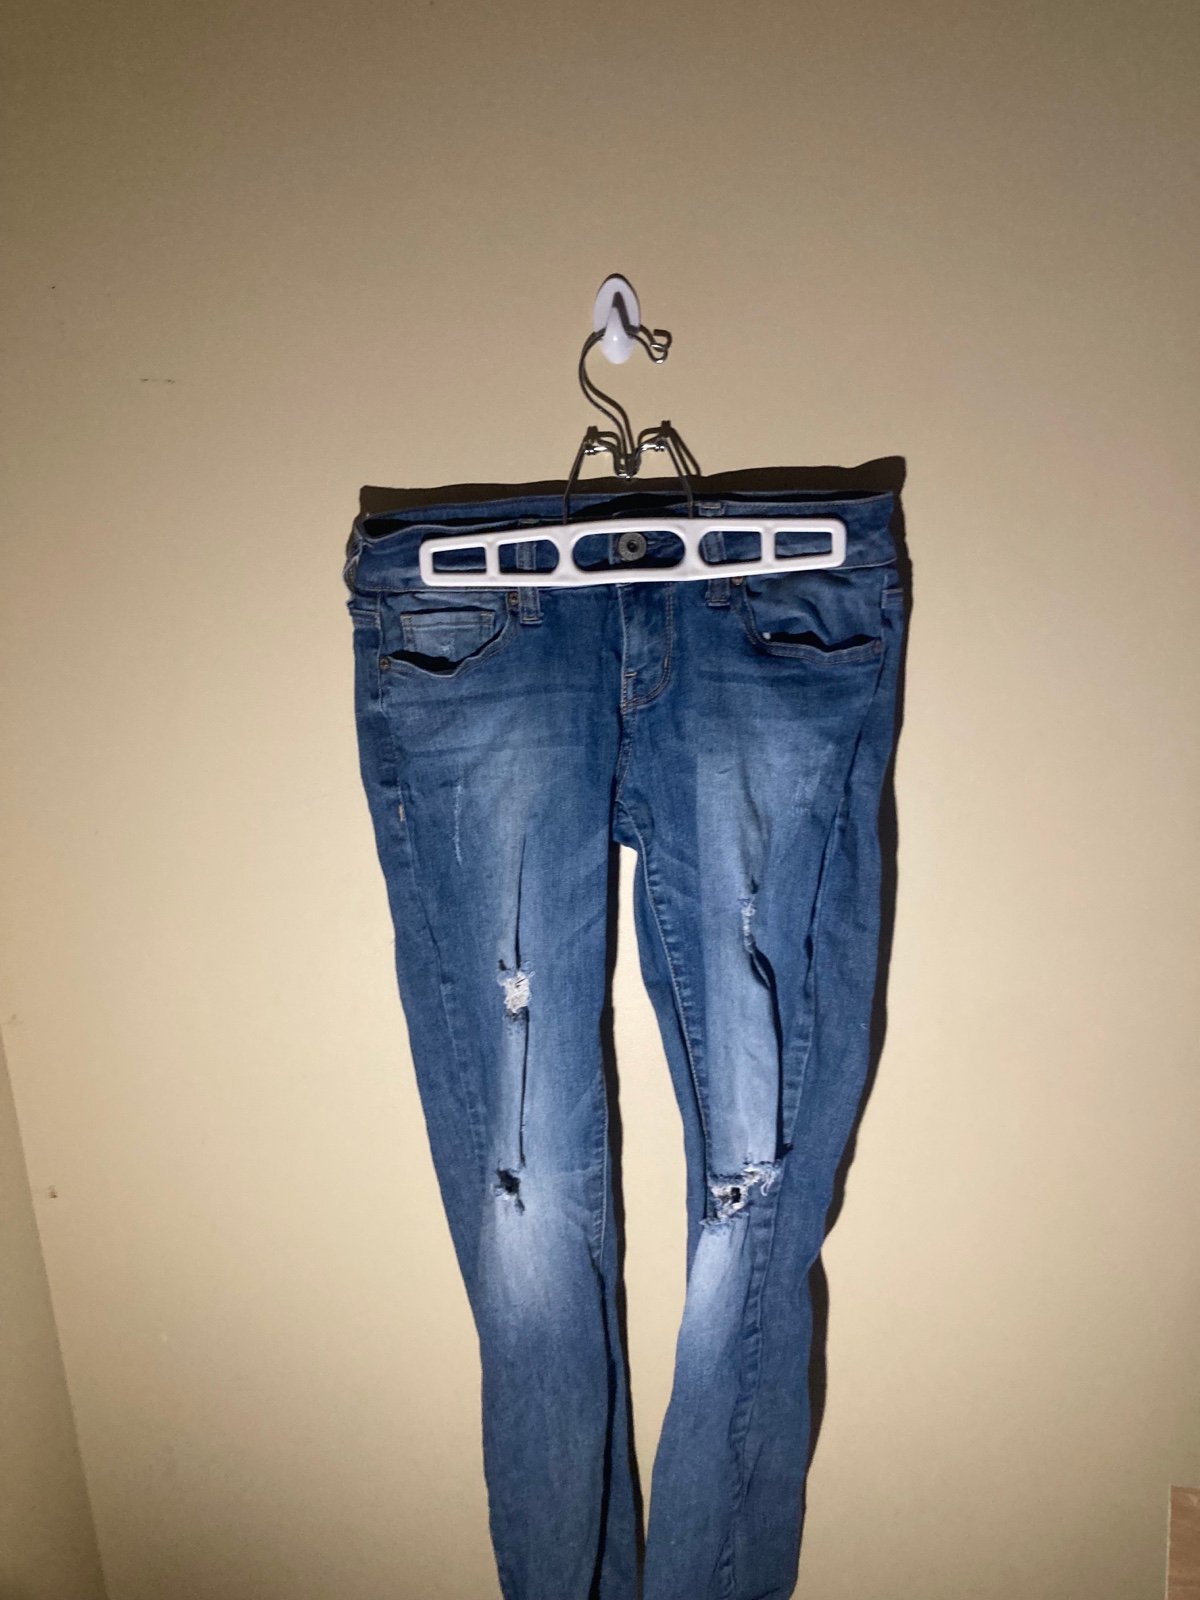 Discounted Guess skinny jeans hKSOFZmjf Counter Genuine